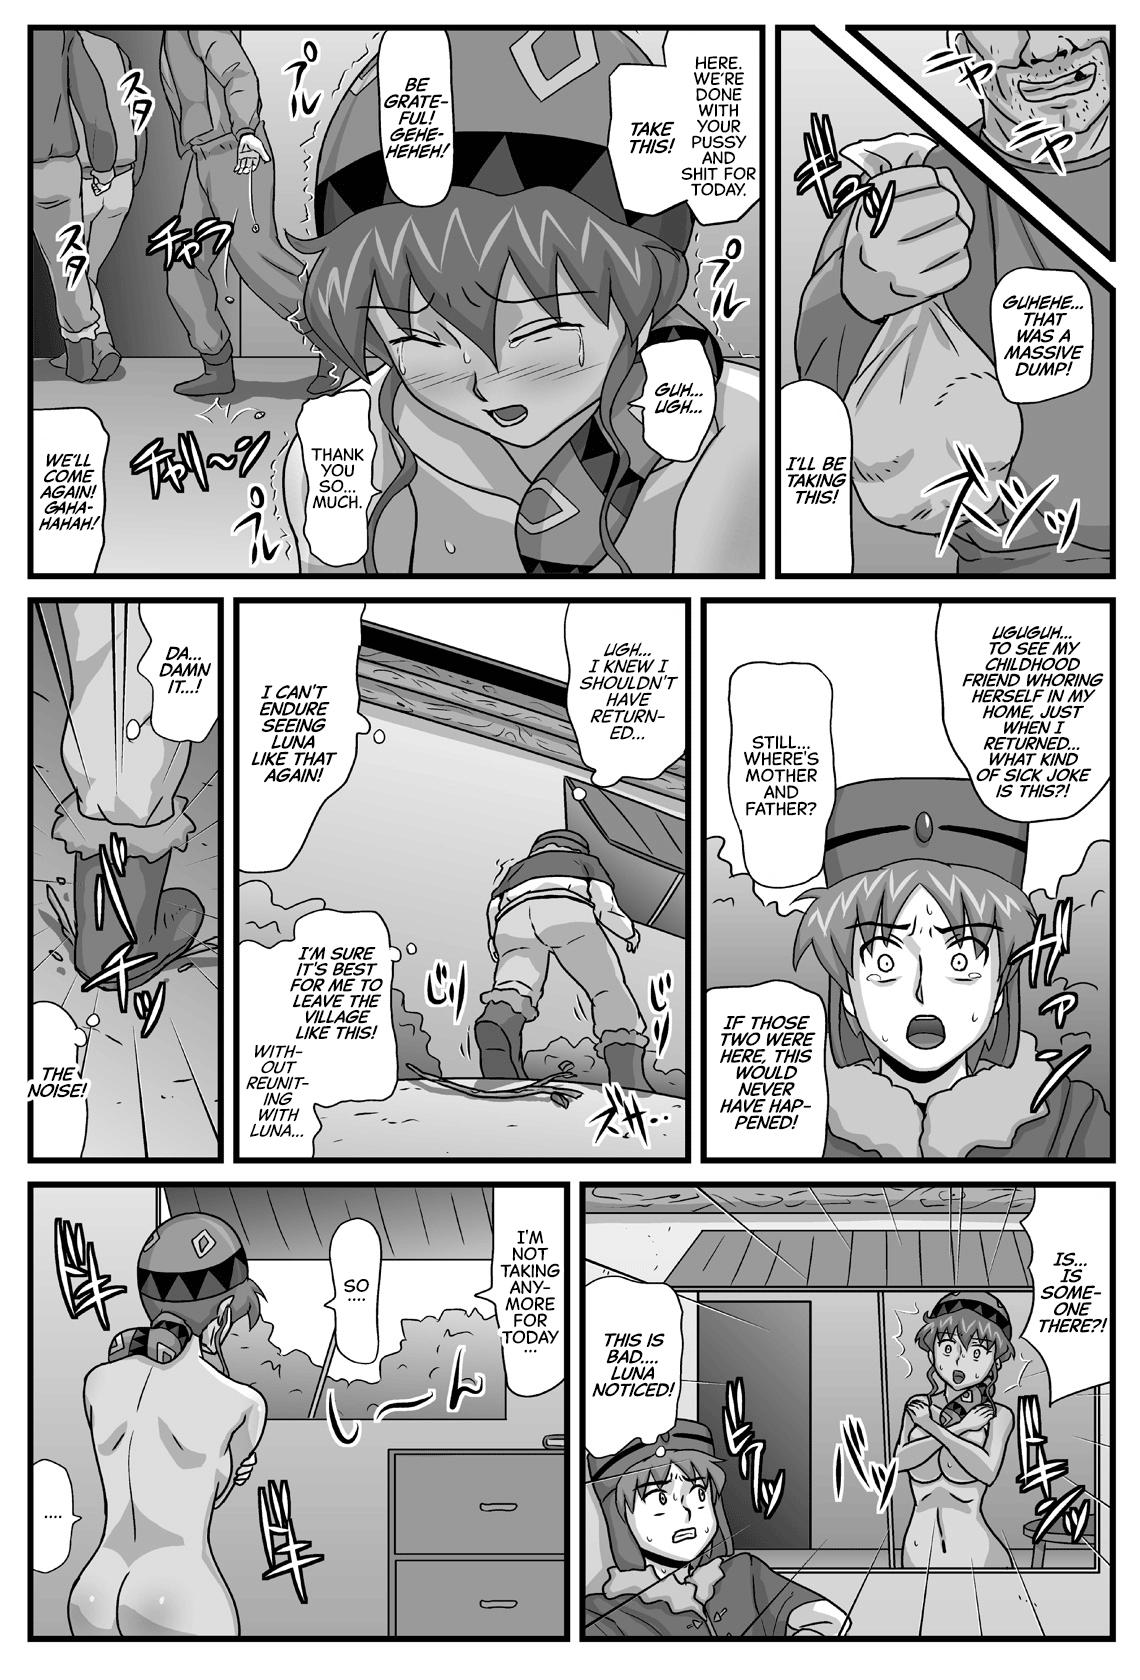 Twinks Burg no Benkihime 5 | The Cumdumpster Princess of Burg 5 - Lunar silver star story Pussy Fingering - Page 6